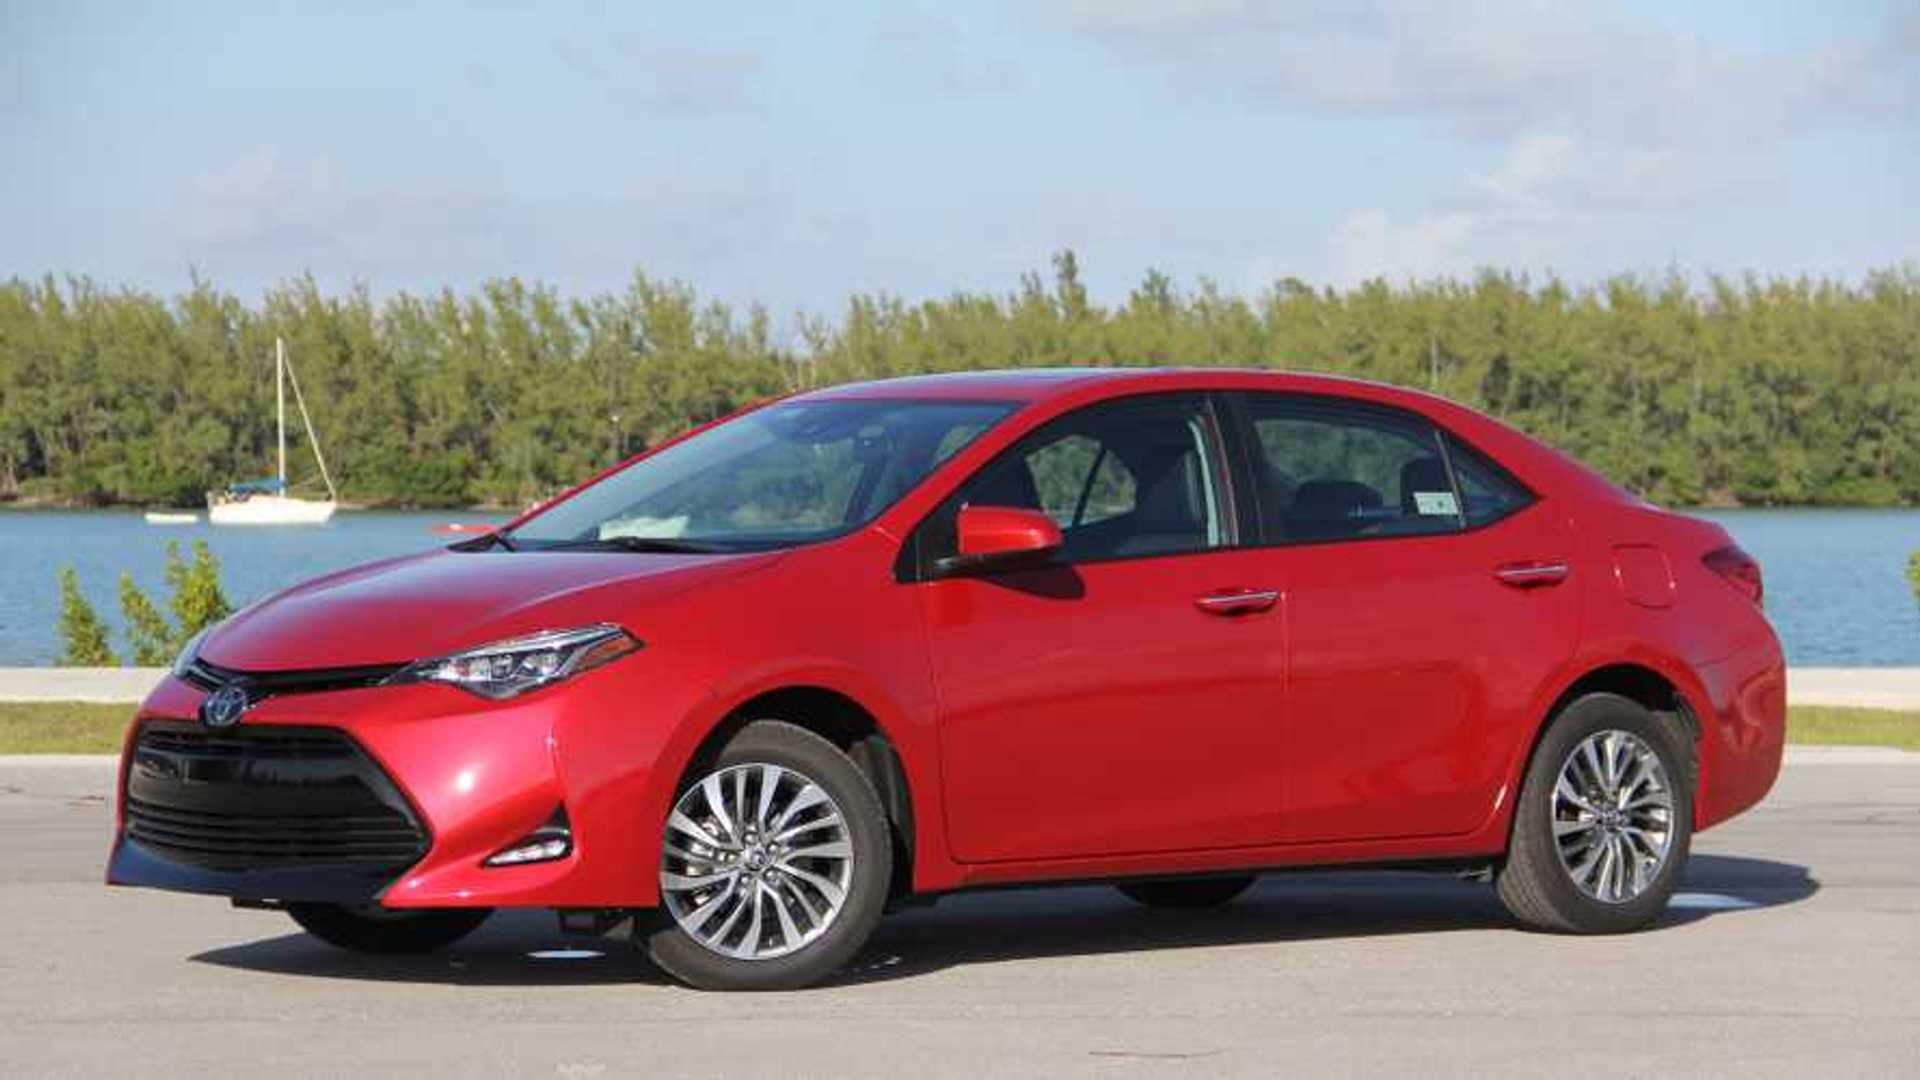 2018 Toyota Corolla XLE Review: Coroll-ing With The Changes